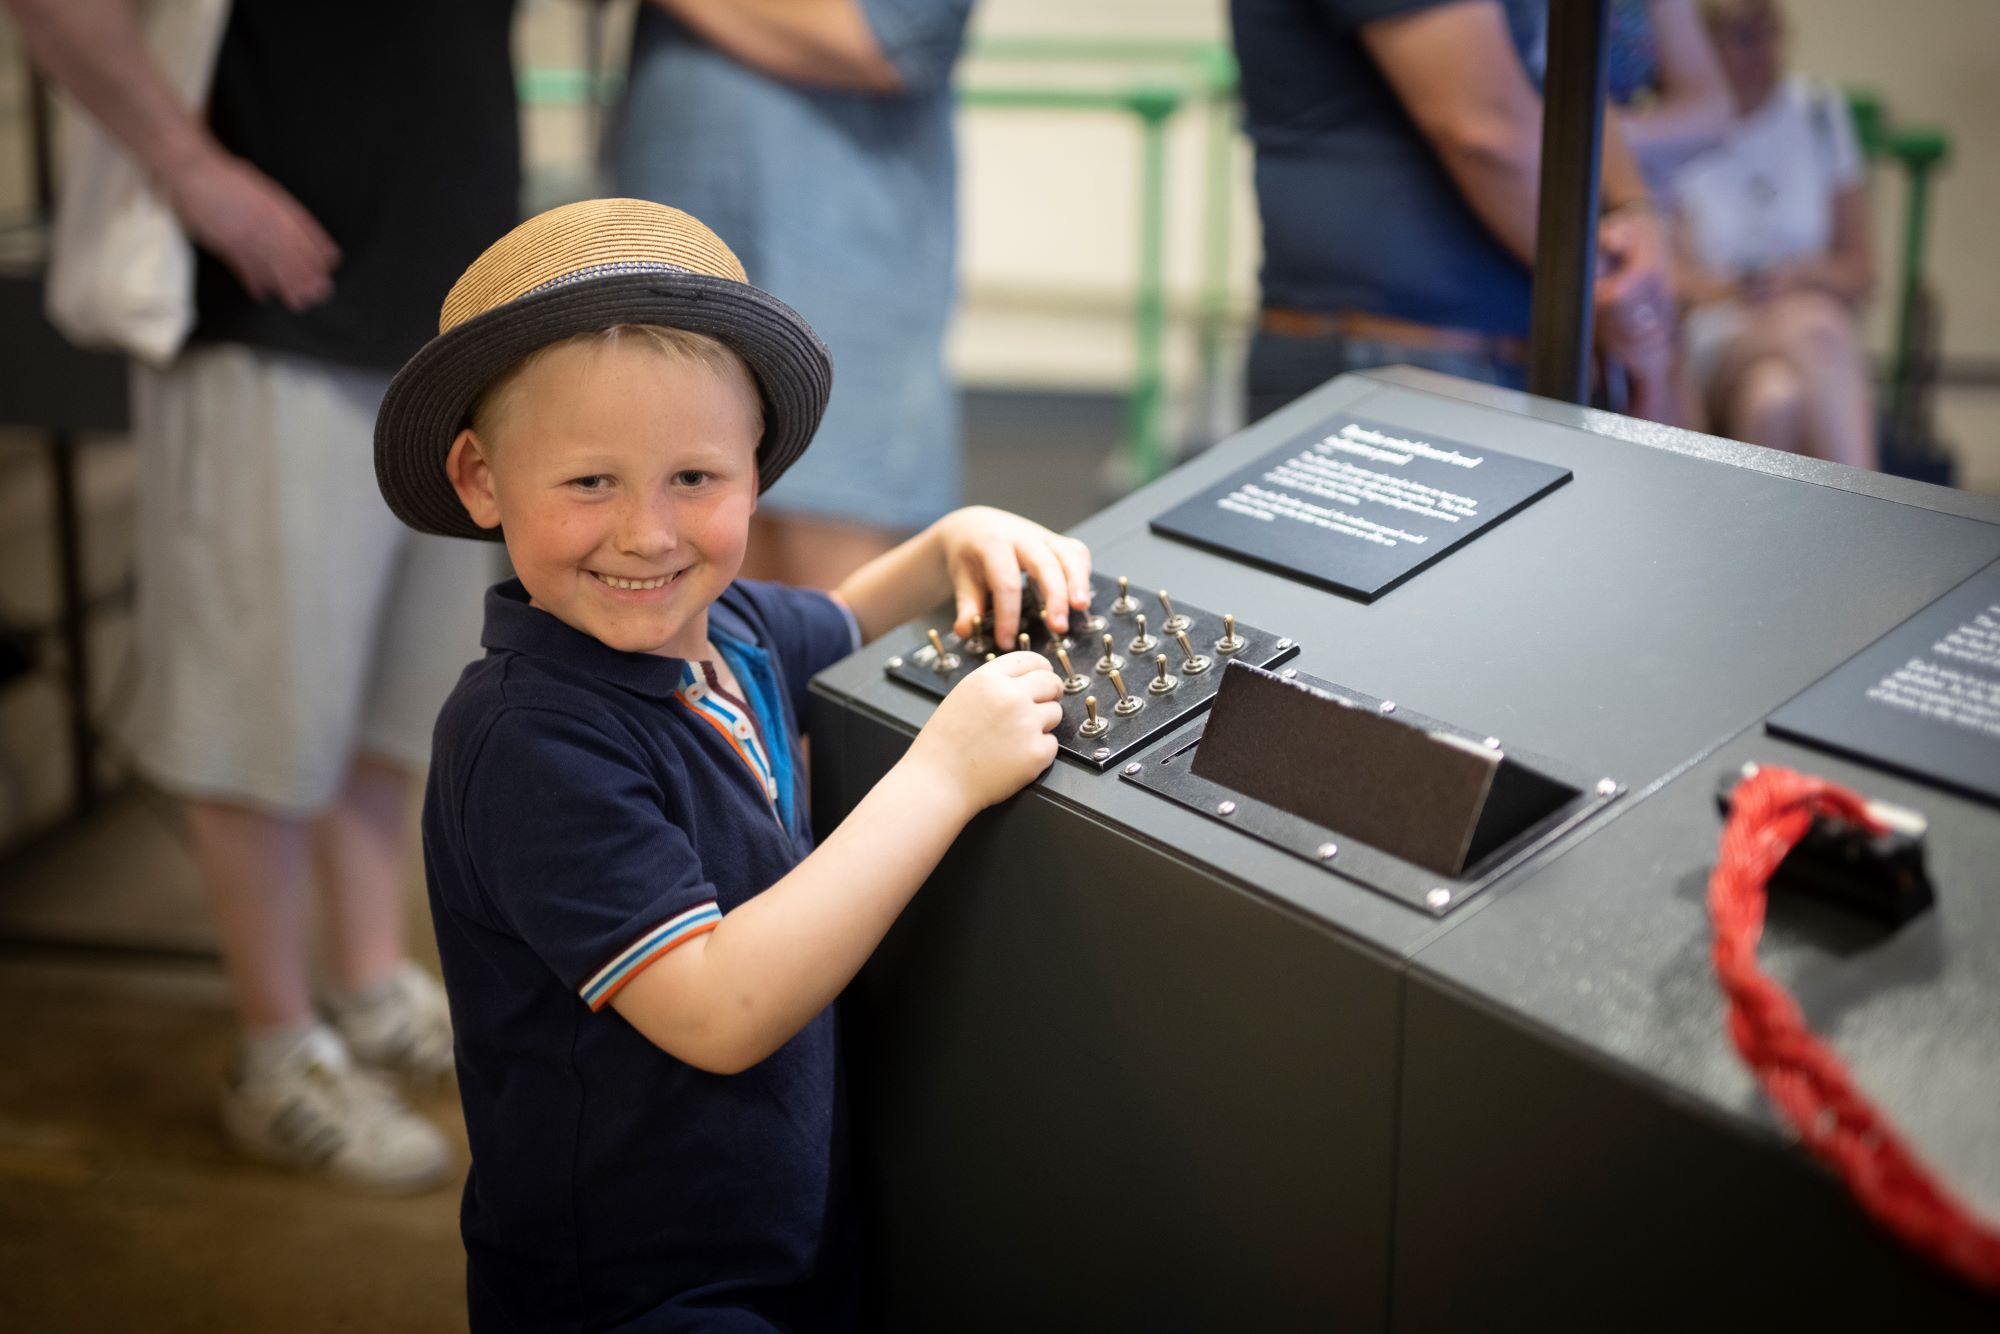 Summer Family Fun at Bletchley Park Top Image